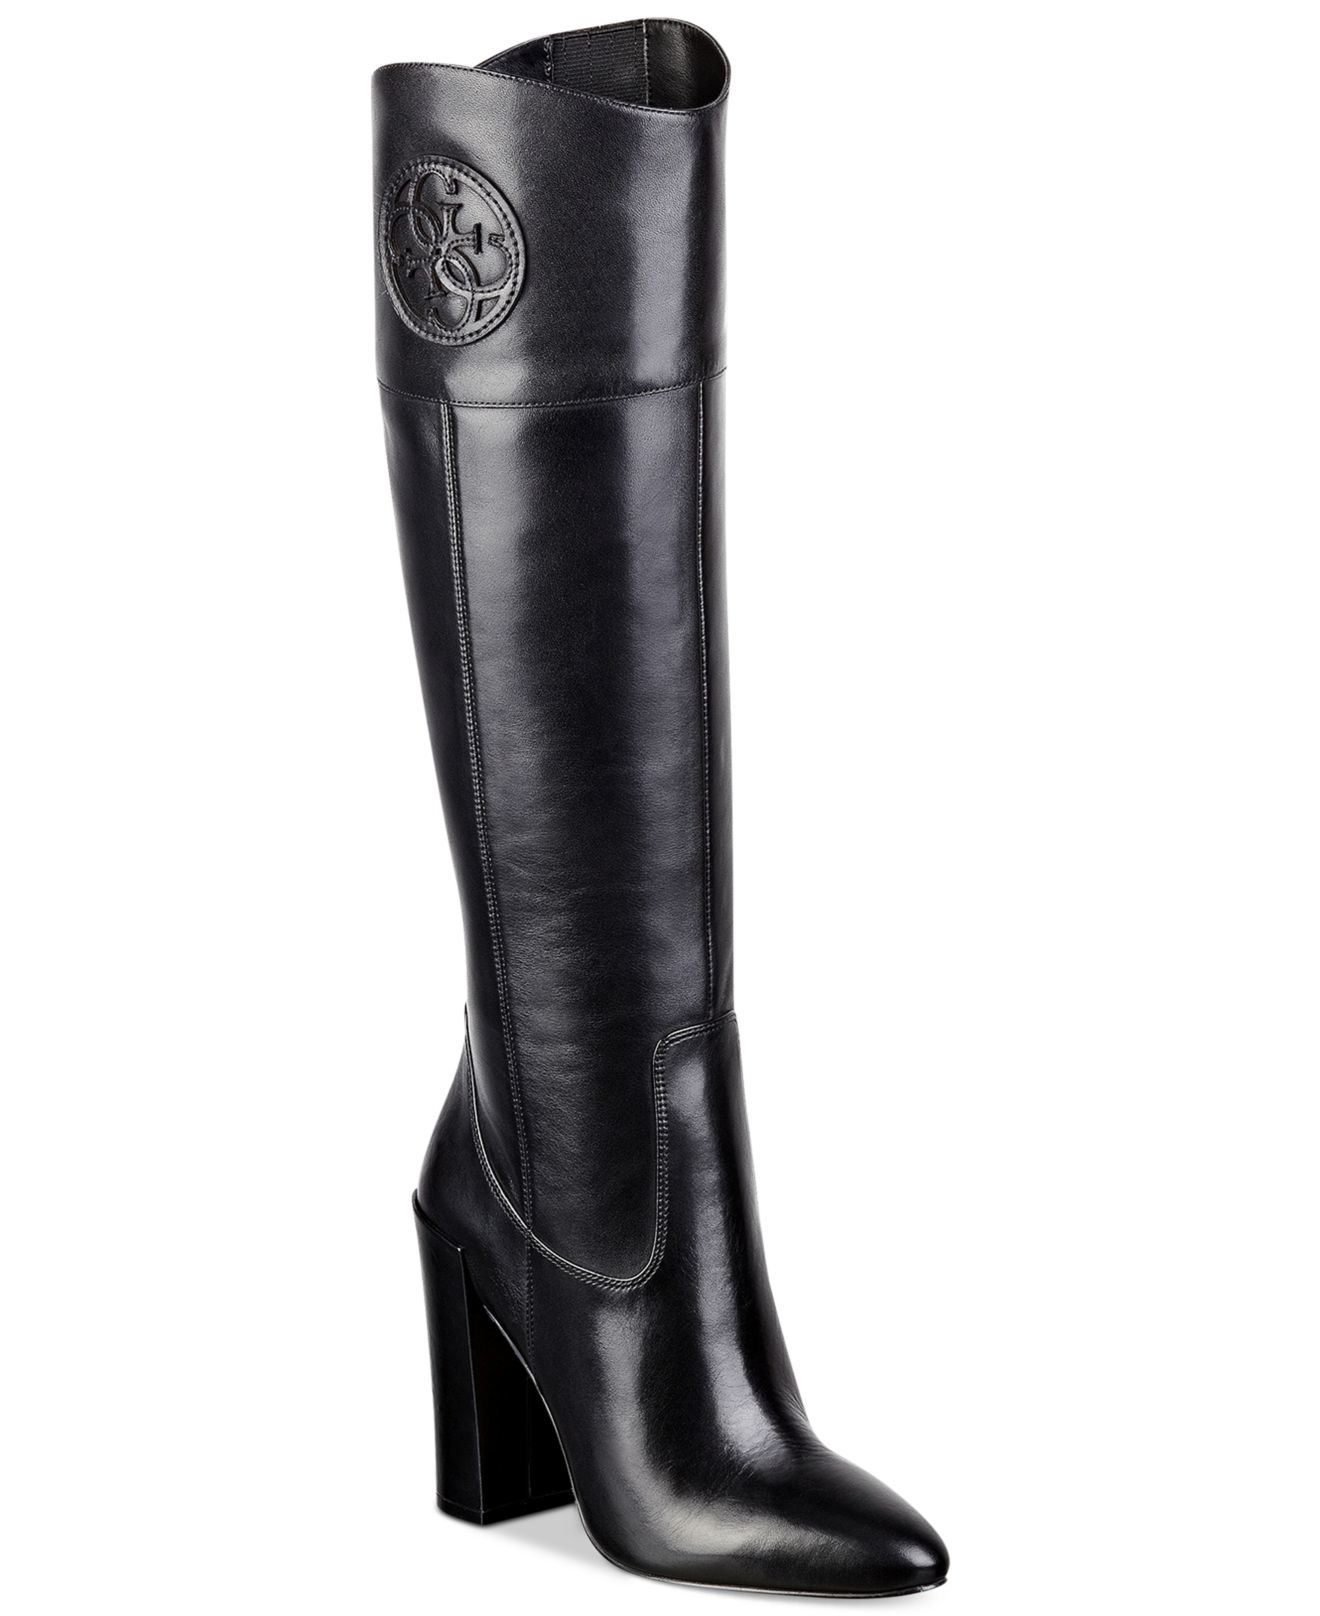 Guess Women's Dalen Tall High Heel Boots in Black Leather (Black) - Lyst